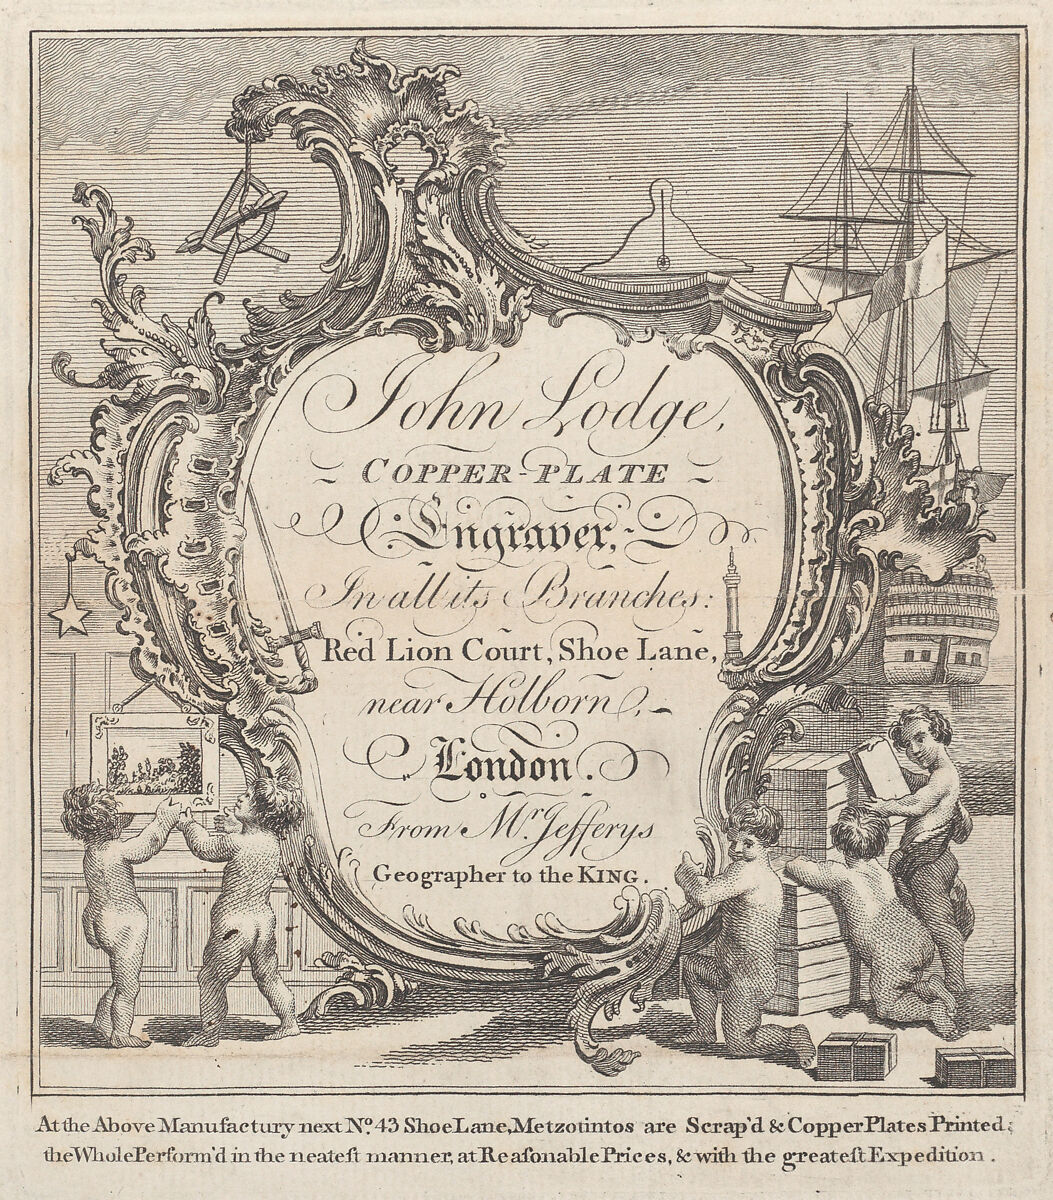 Trade Card for John Lodge, Copper Plate Engraver, Anonymous, British, 18th century, Engraving 